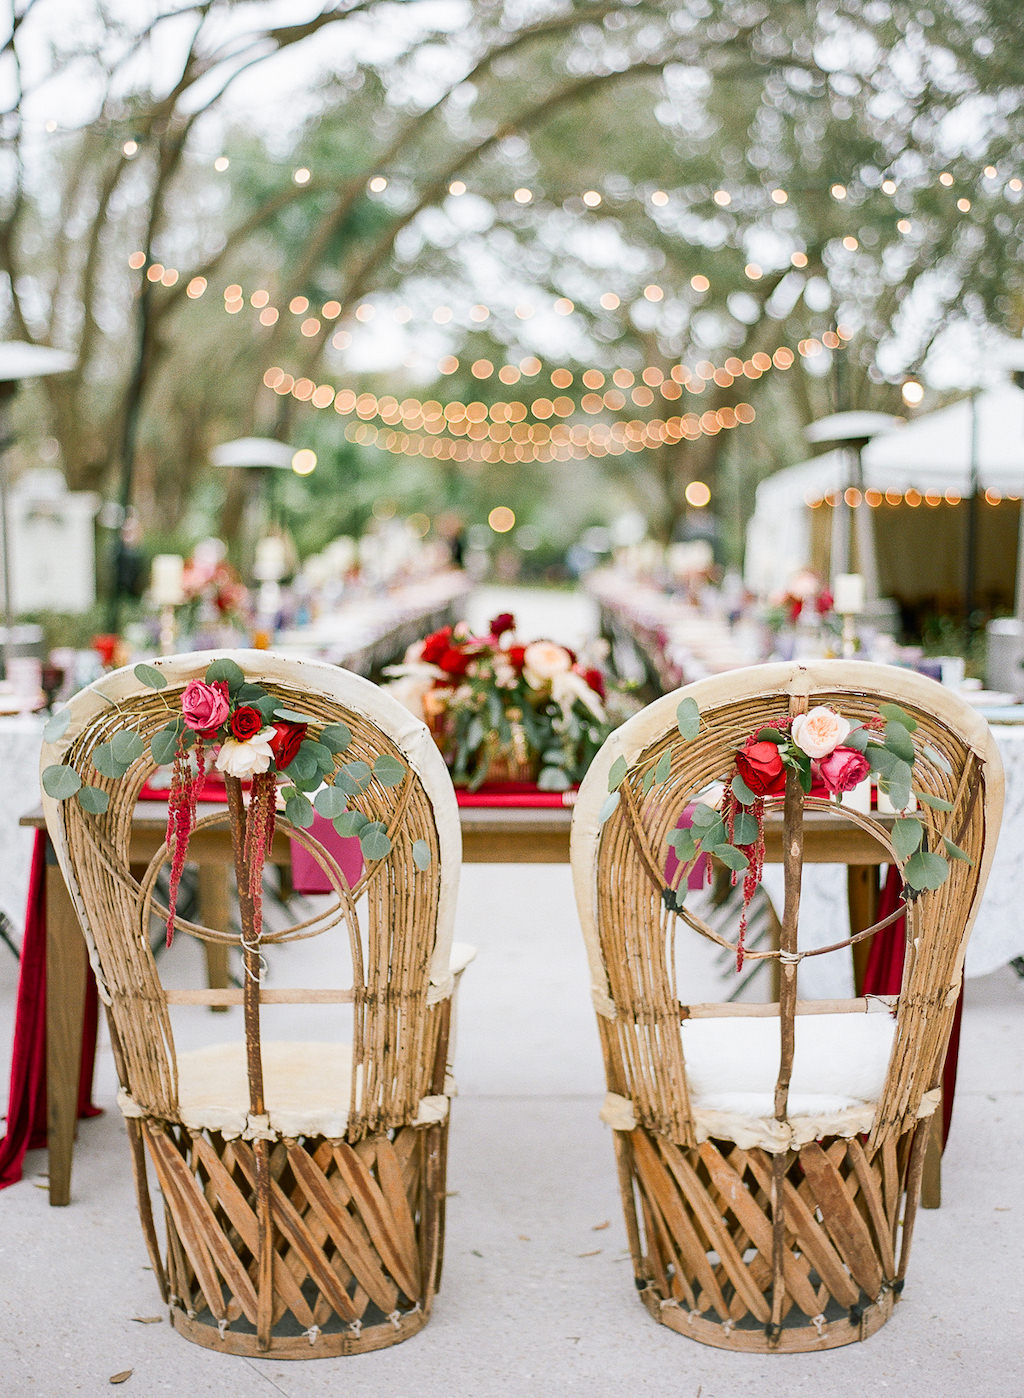 Boho Chic Vintage Inspired Outdoor Lakeland Florida Wedding Reception Decor, Wicker Chairs with Red, Pink, White and Greenery Florals on Wicker Chairs for Sweetheart Table